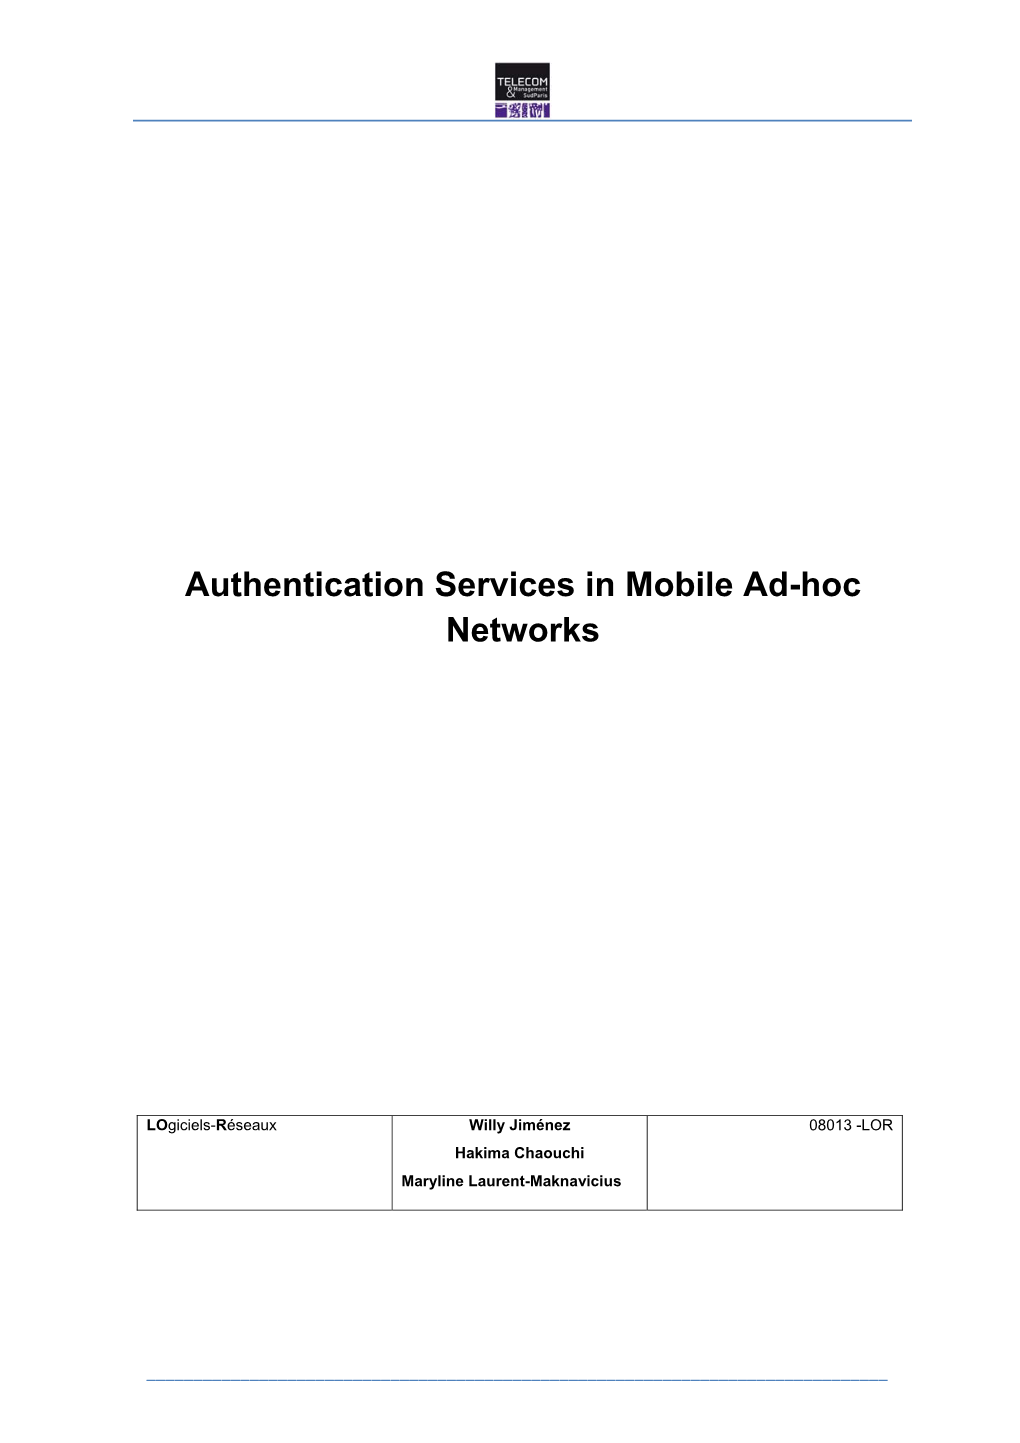 Authentication Services in Mobile Ad-Hoc Networks